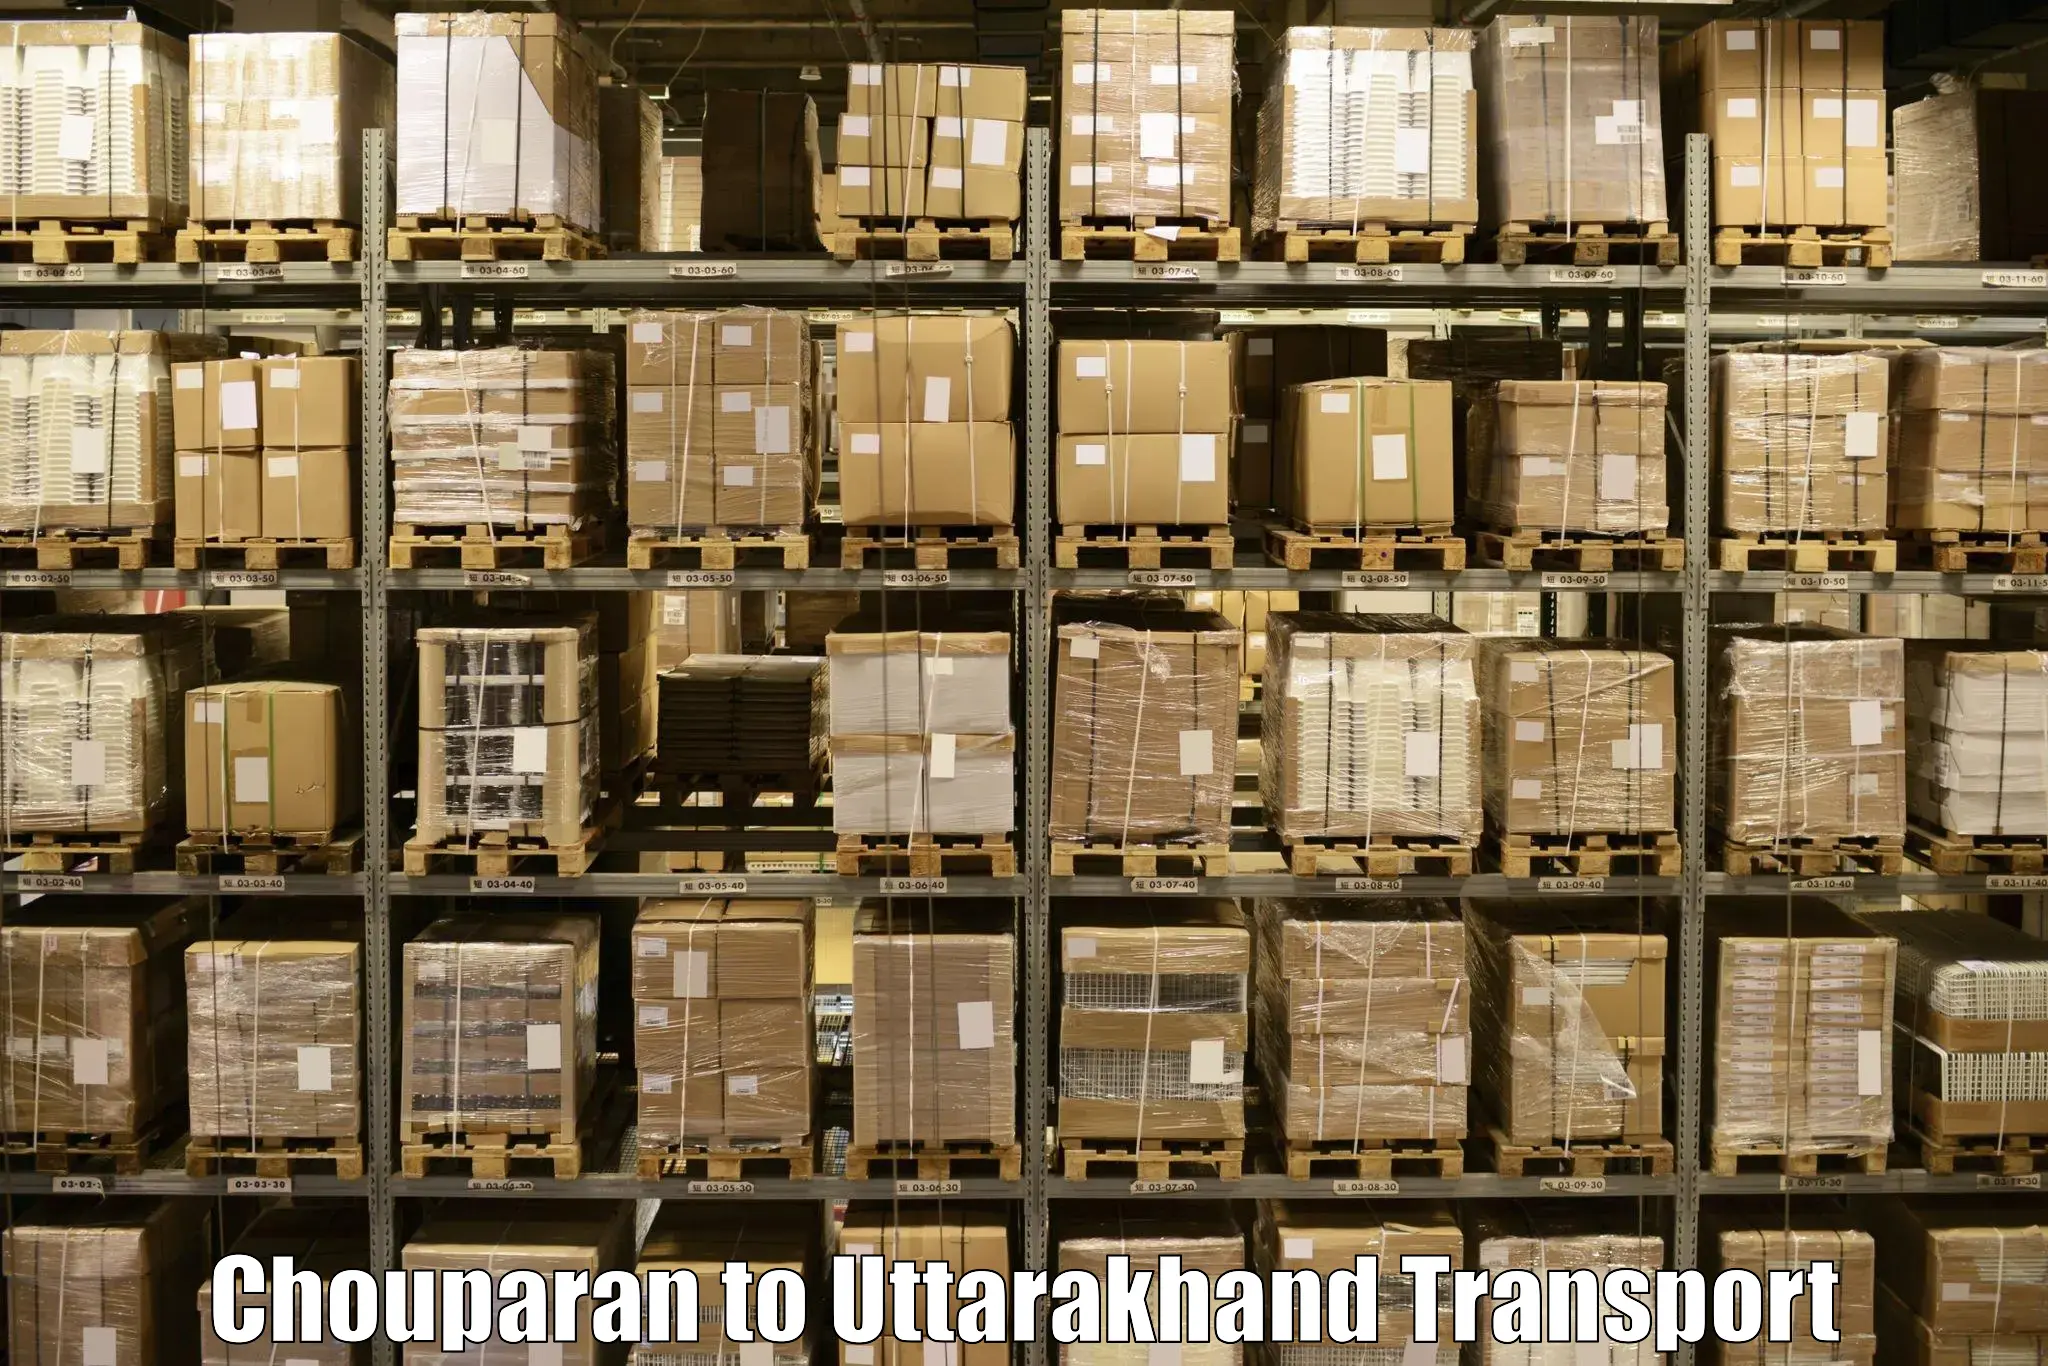 Truck transport companies in India Chouparan to Uttarakhand